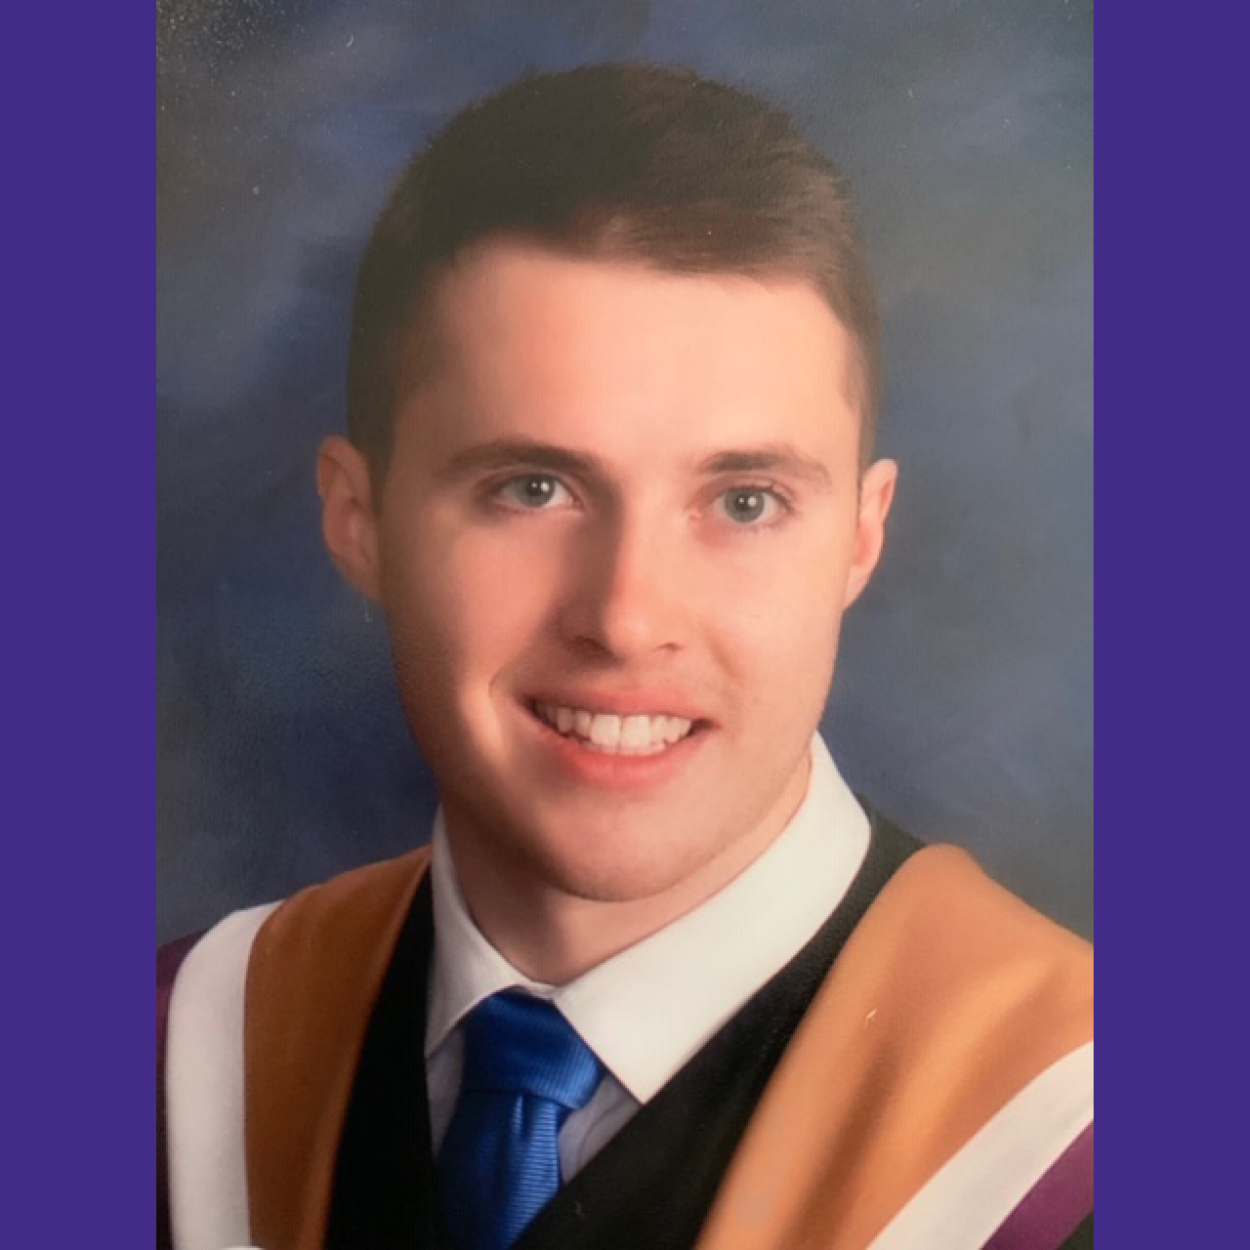 Graduation portrait of Braden Story smiling at the camera and wearing Laurier convocation robes